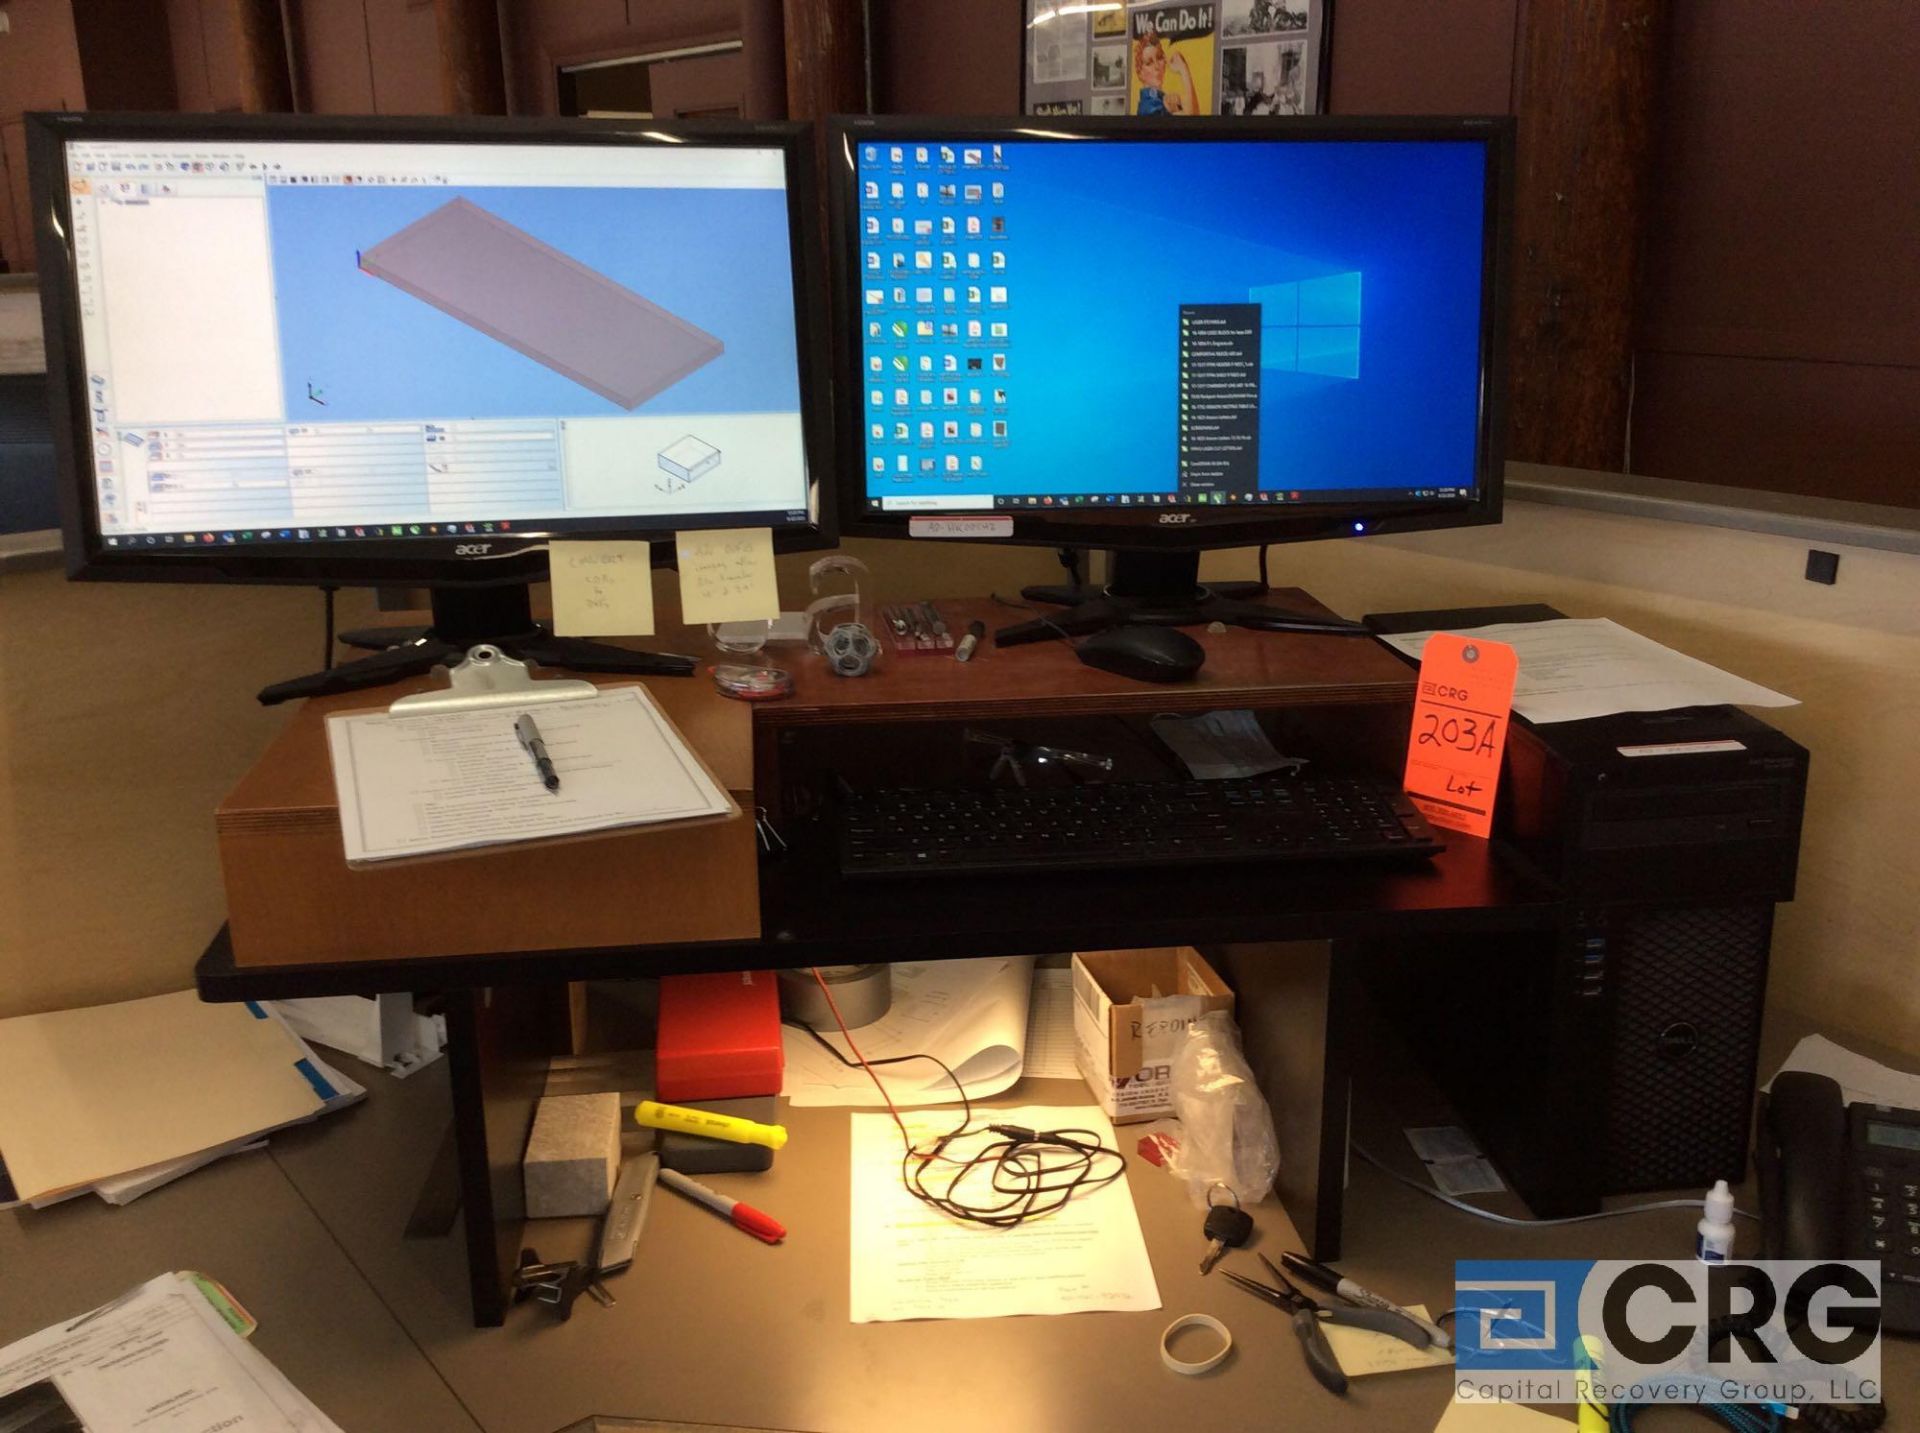 Dell Precision Tower 3620, 5, and CorelDraw X8 software programs installed , used on CNC